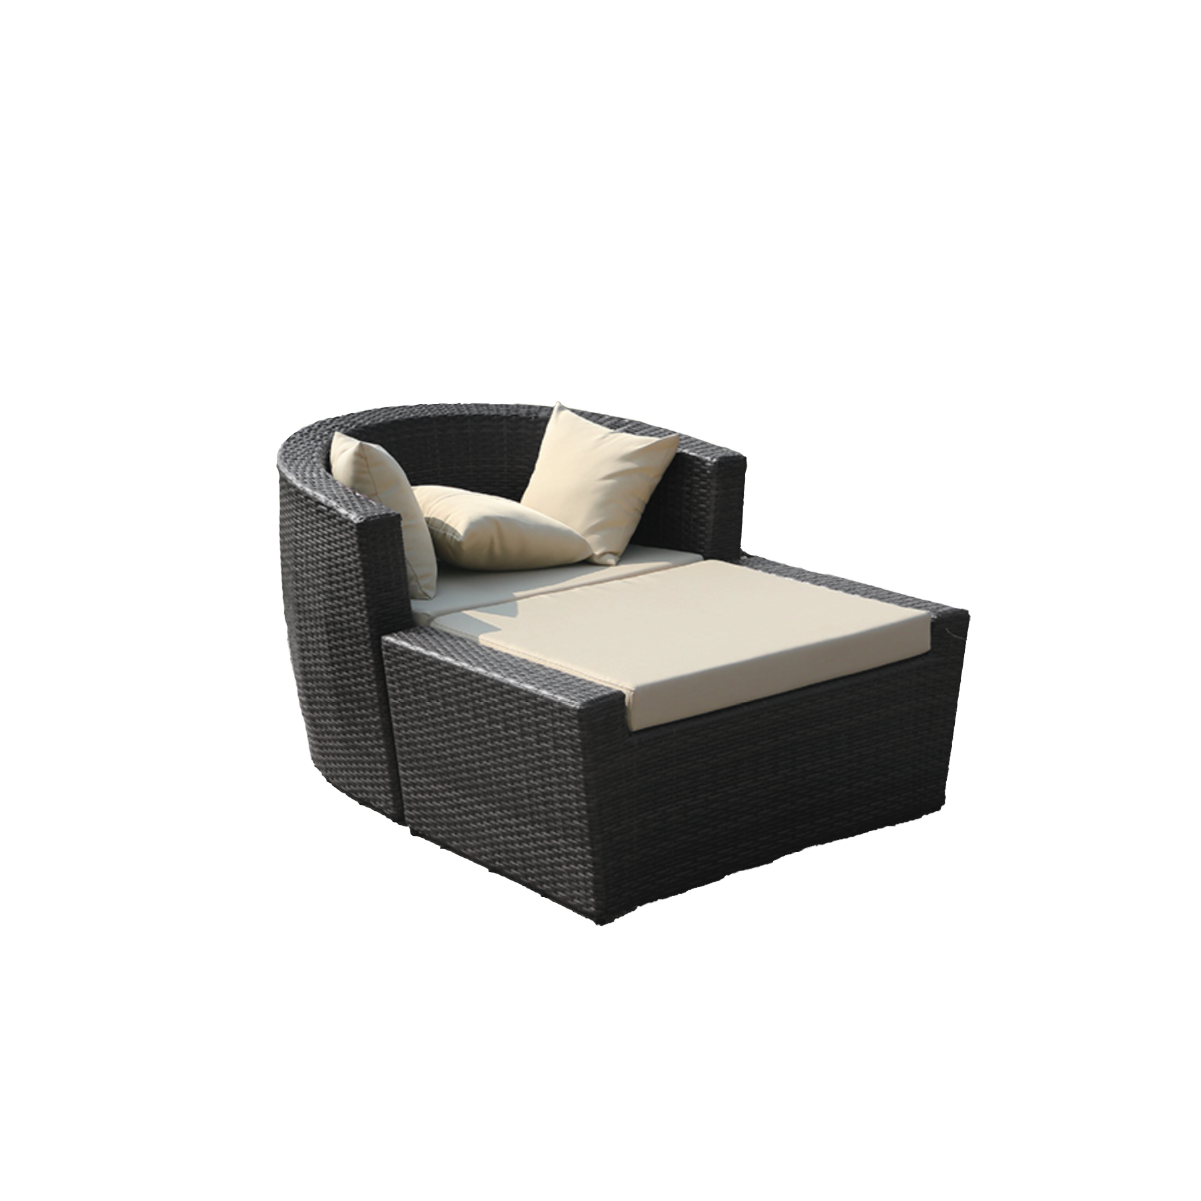 SOFA CHAIRS AND OTTOMAN WITH BASE CUSHION <br>(VL 205)